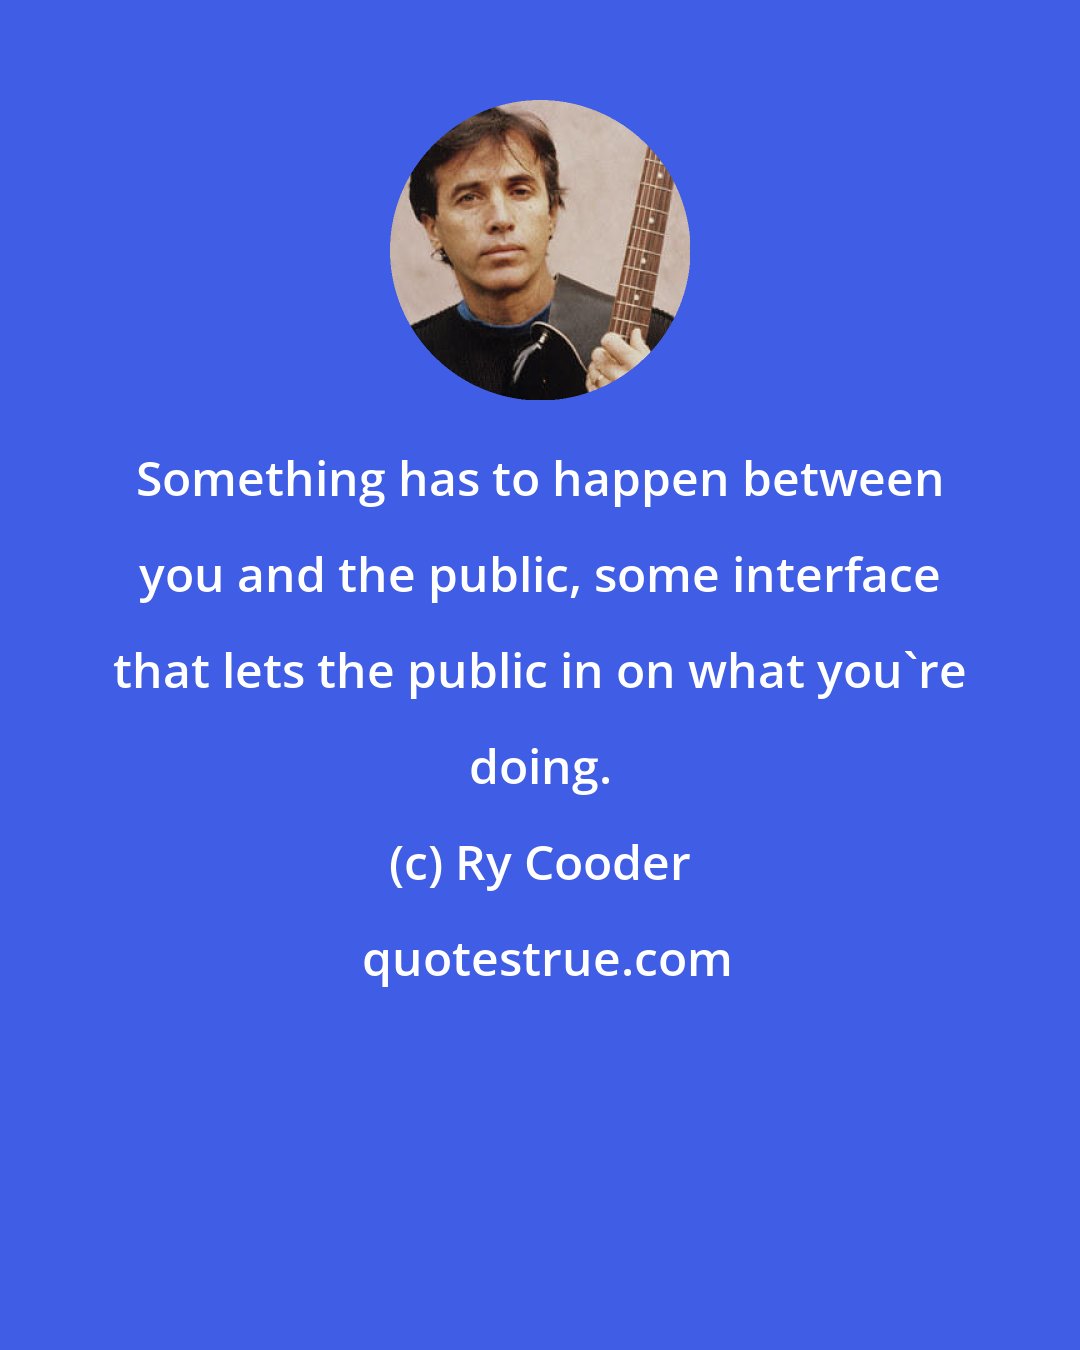 Ry Cooder: Something has to happen between you and the public, some interface that lets the public in on what you're doing.